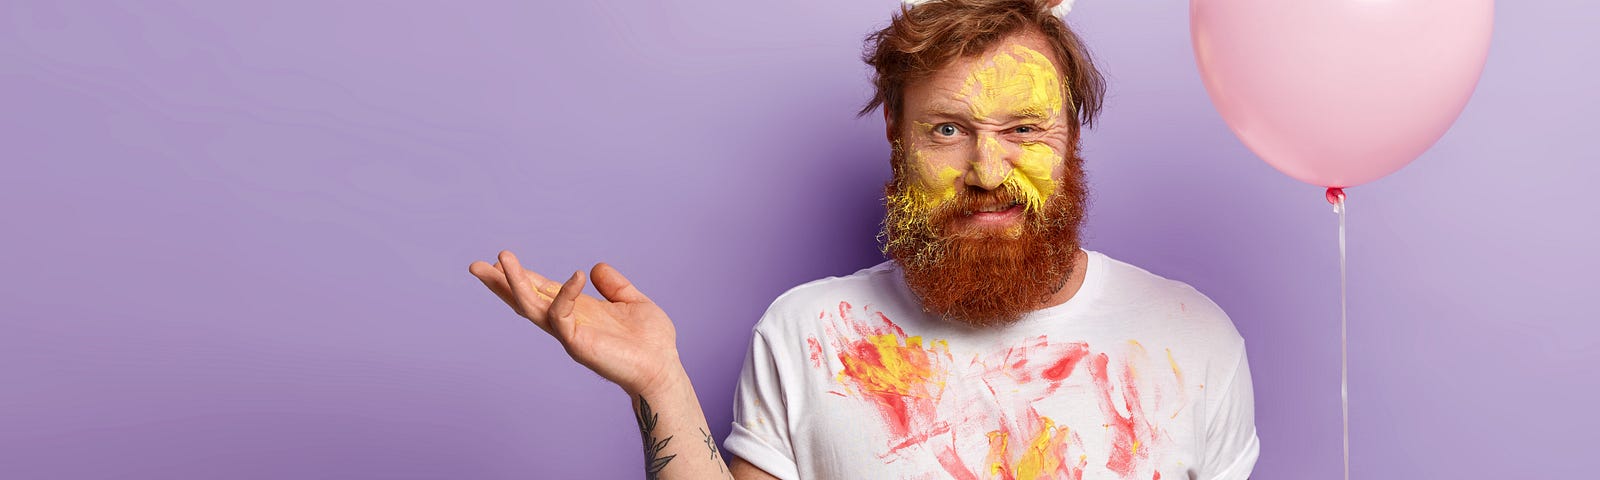 A man with red hair, a beard and tattoos on his arms, wears a unicorn hat. He has red and yellow paint covering his face and shirt. He holds his right hand up and has a somewhat puzzled expression on his face, all while holding a pink balloon in his left hand. The background behind him is purple.